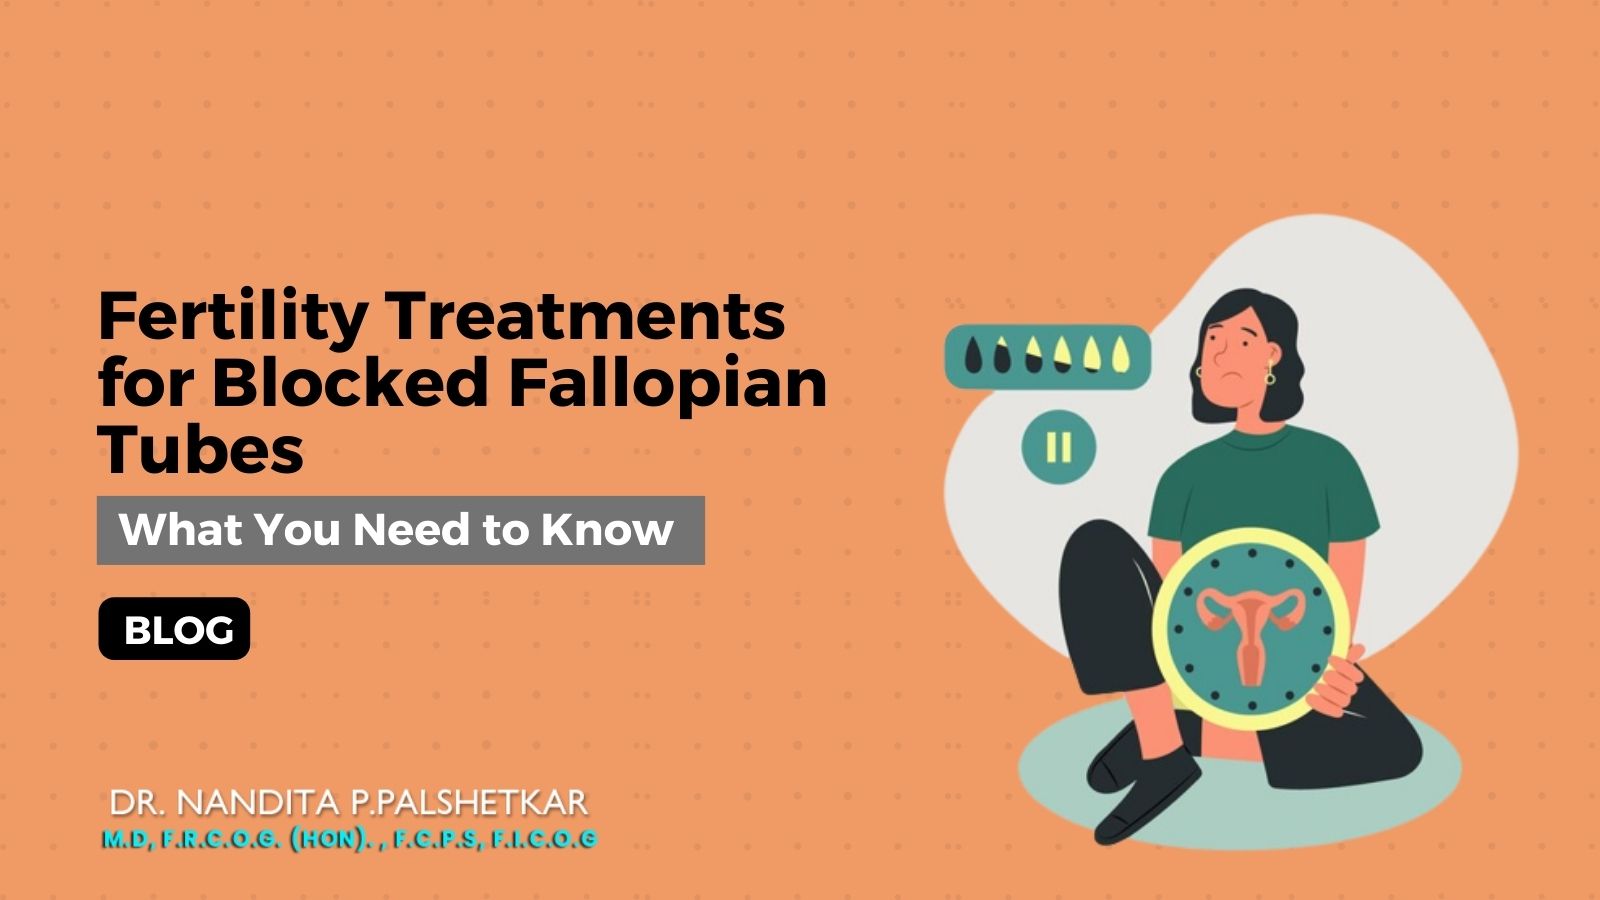 Fertility Treatments for Blocked Fallopian Tubes: What You Need to Know